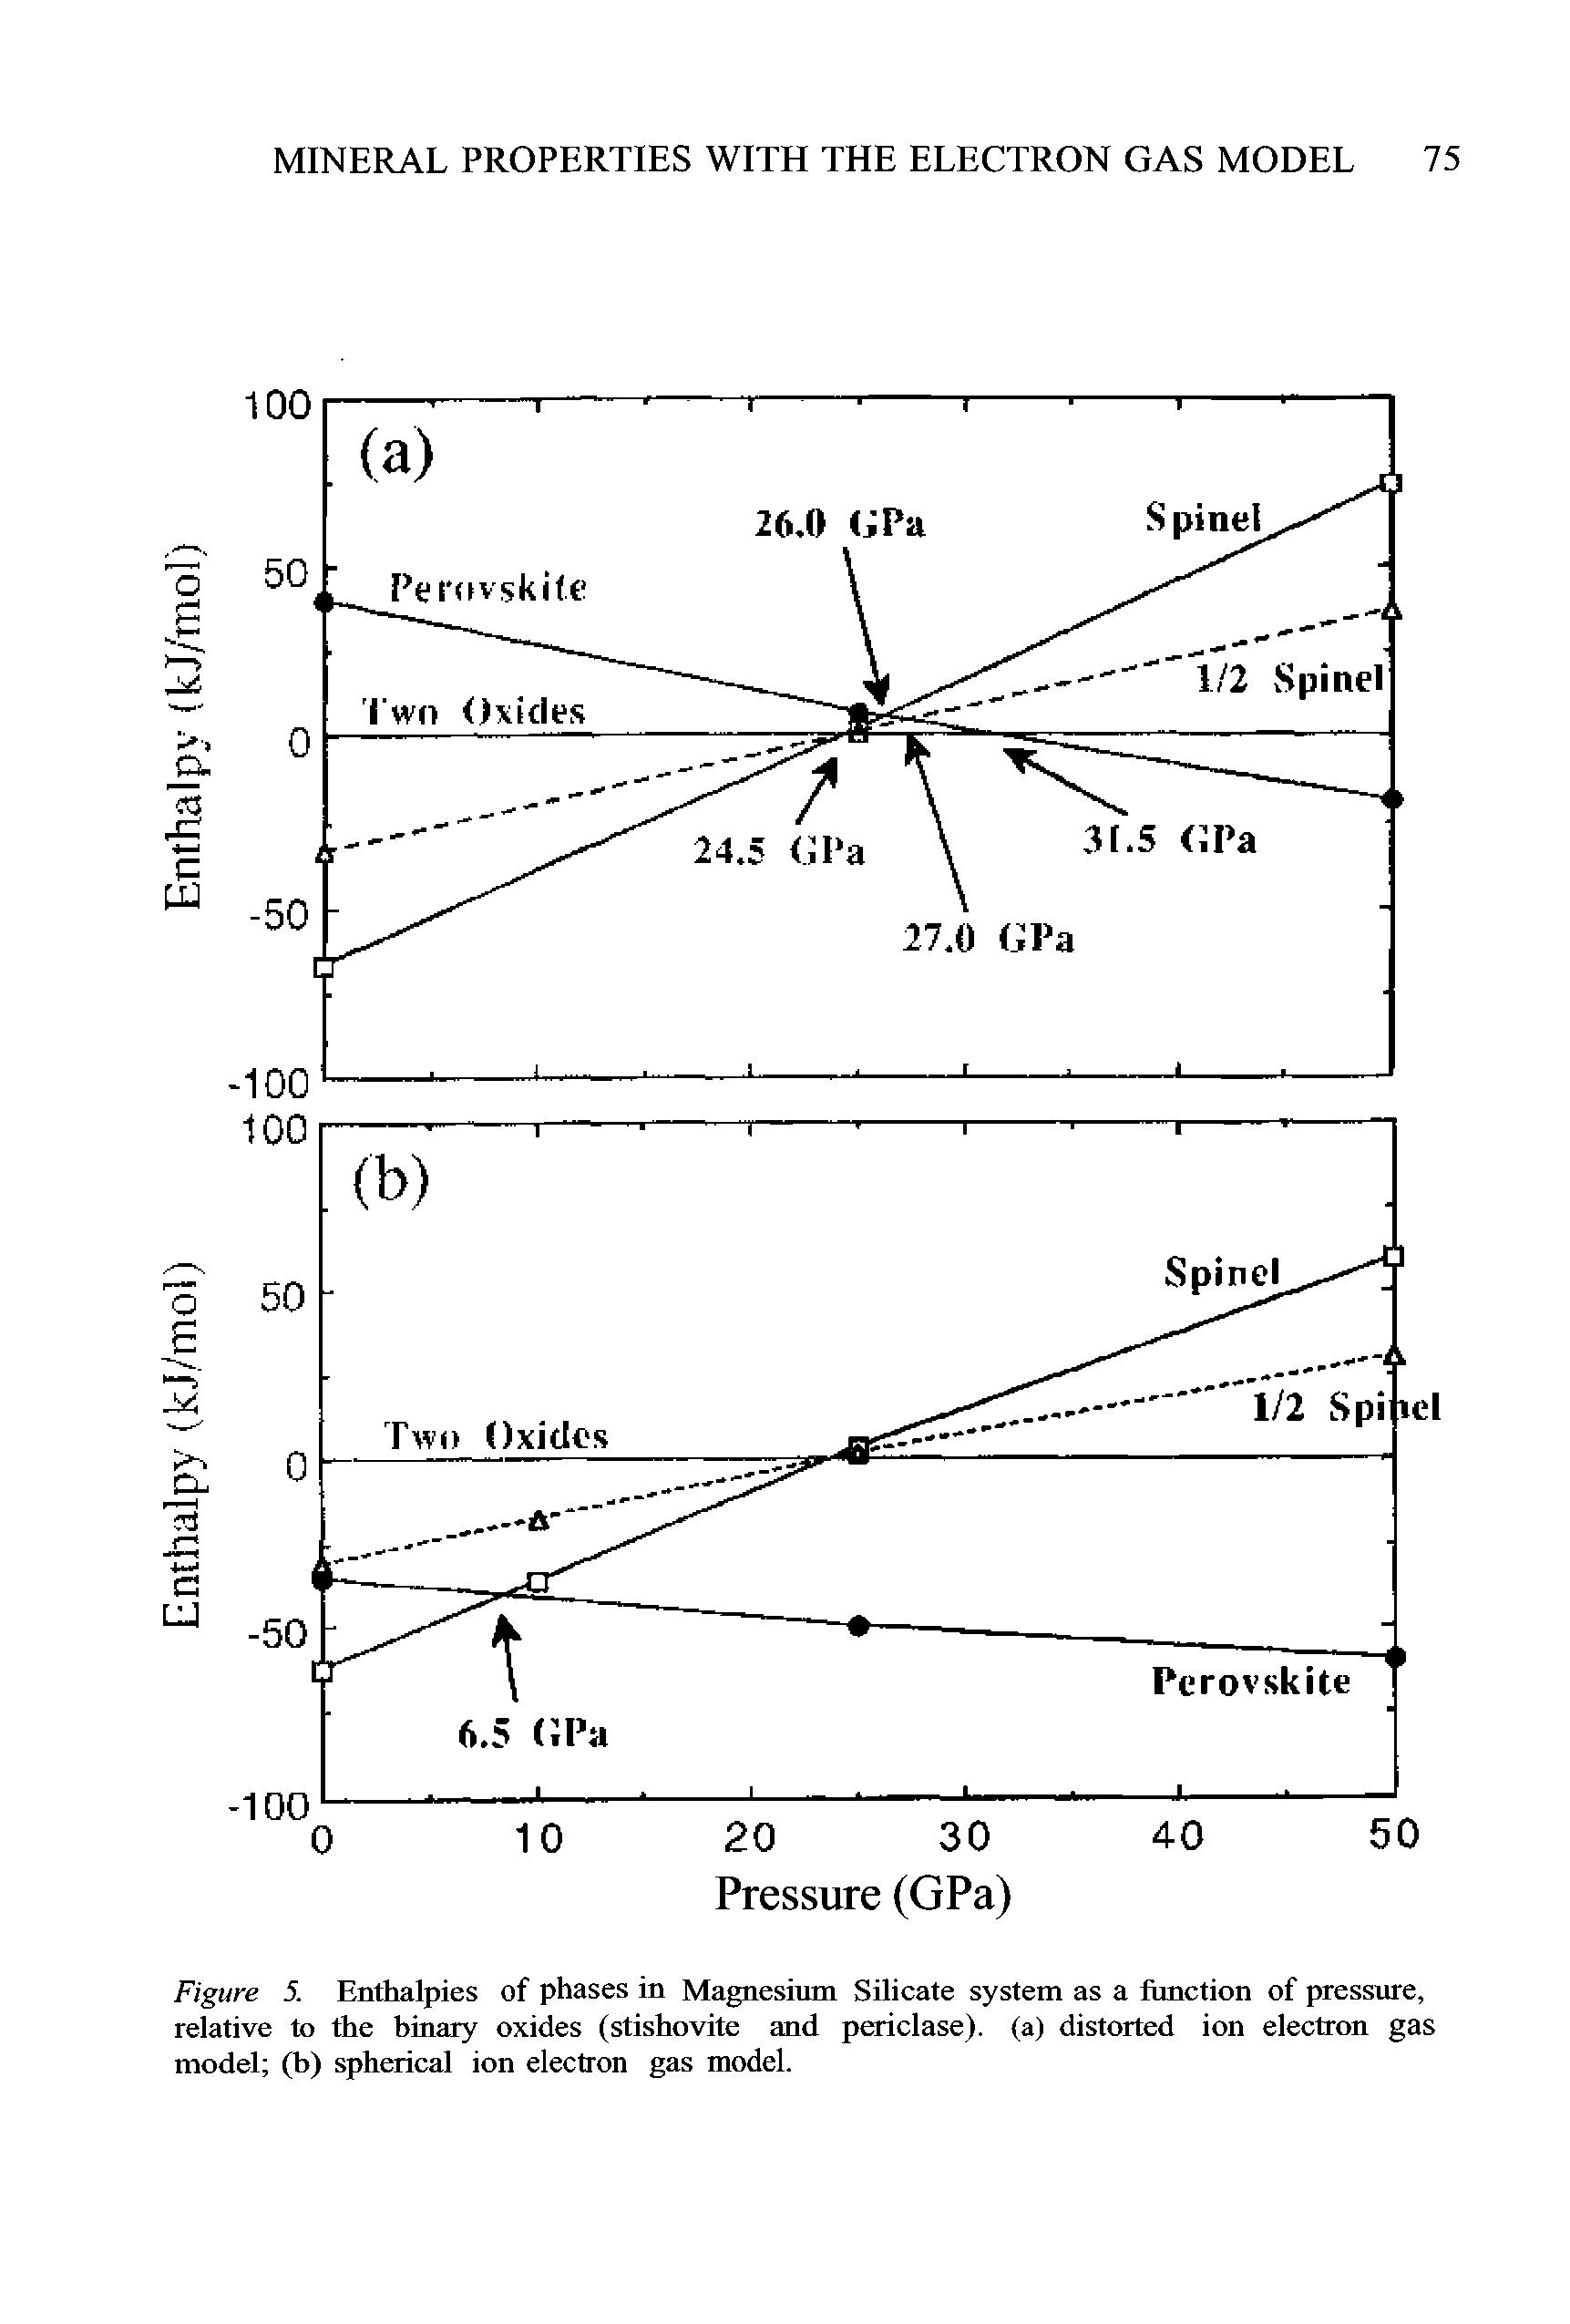 Figure 5. Enthalpies of phases in Magnesium Silicate system as a function of pressure, relative to the binary oxides (stishovite and periclase). (a) distorted ion electron gas model (b) spherical ion electron gas model.